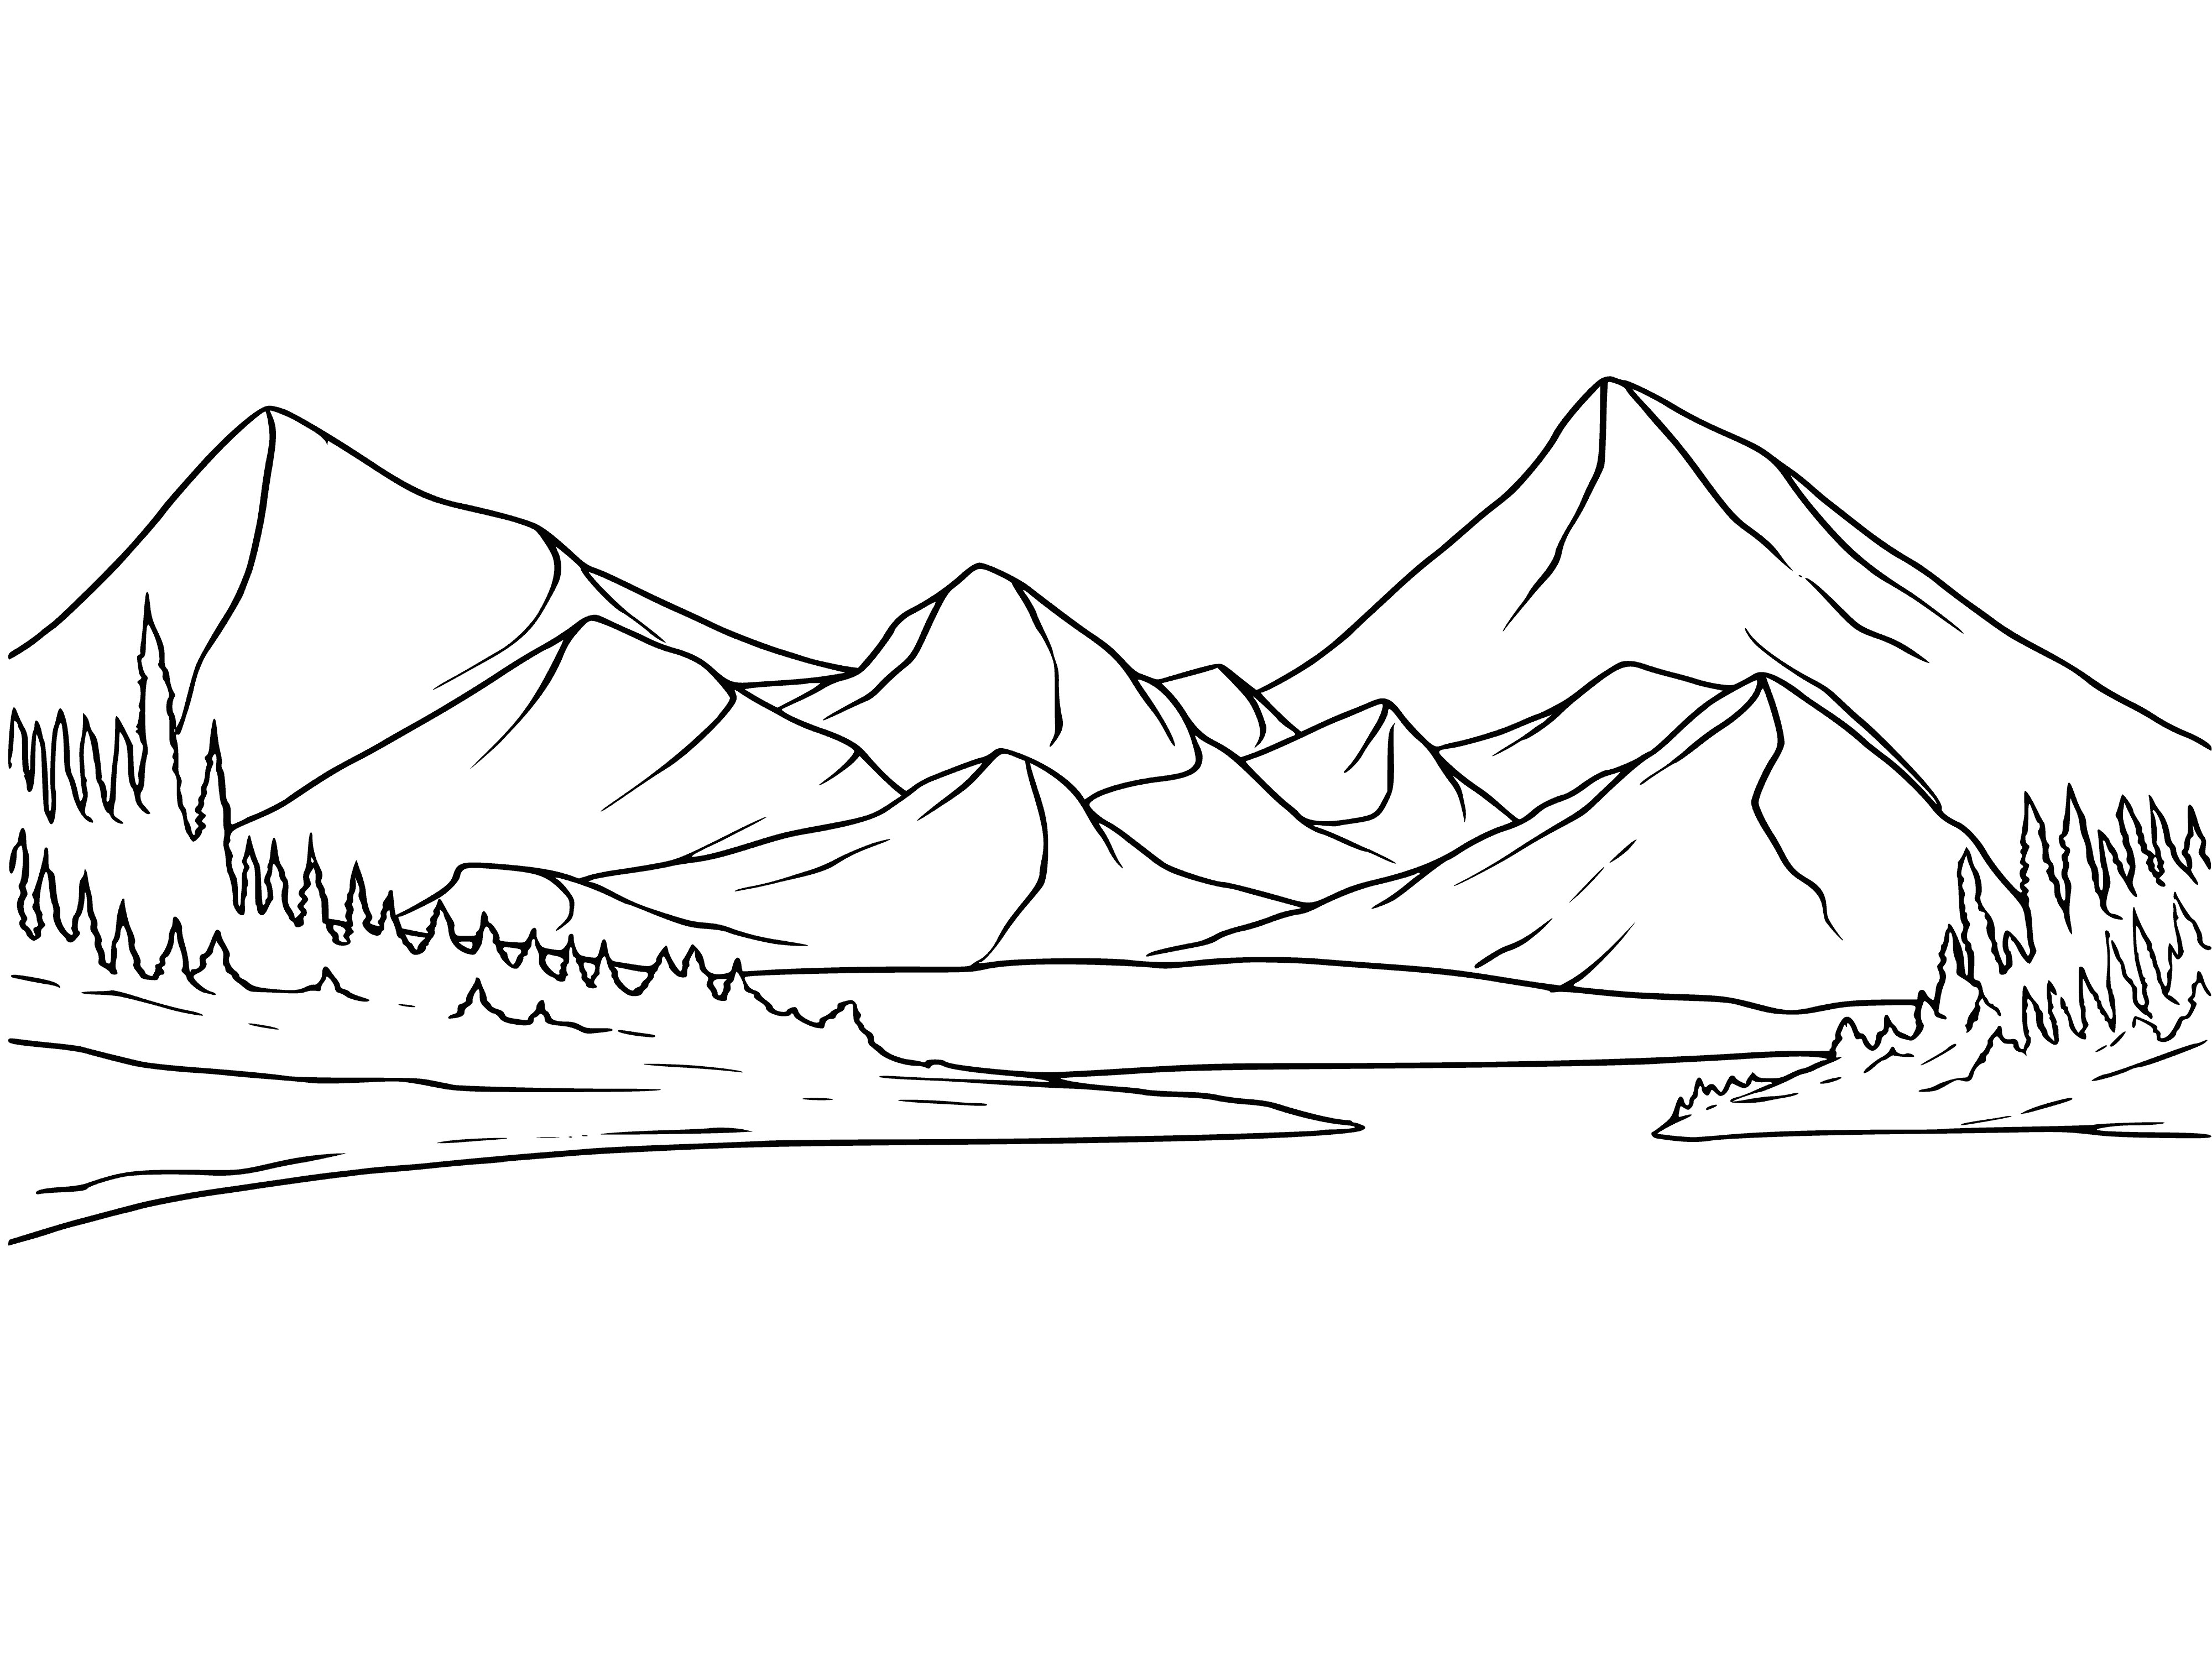 The mountains coloring page